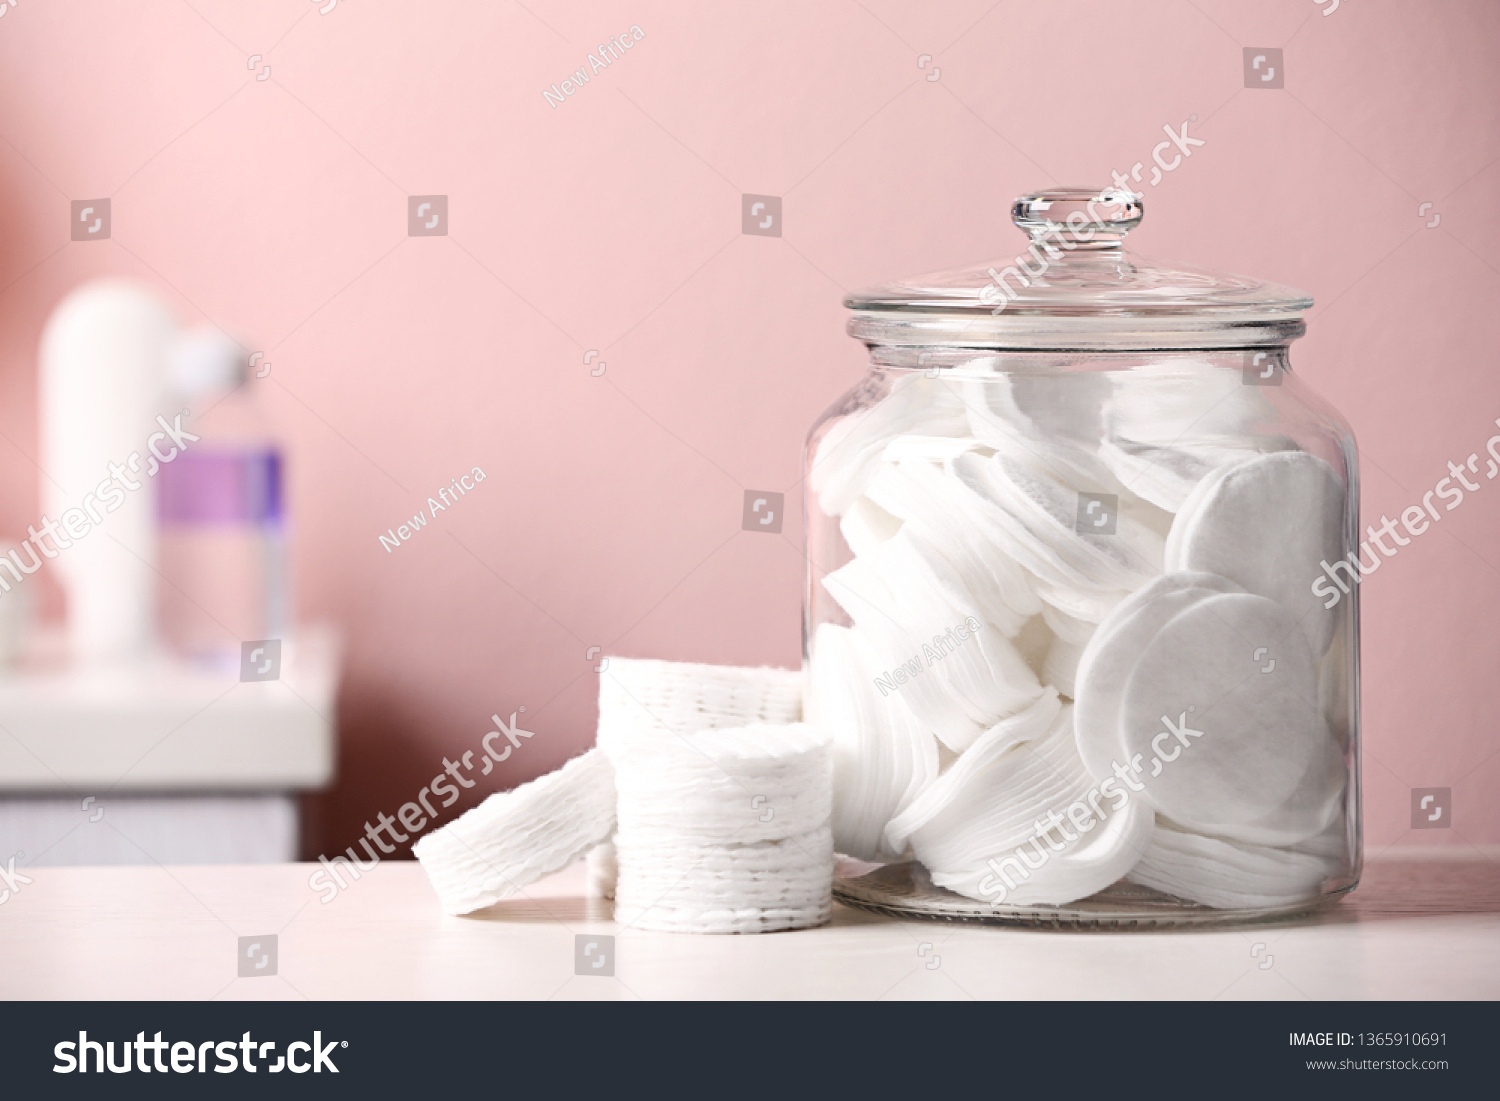 Glass jar with cotton pads on table in bathroom, space for text #1365910691